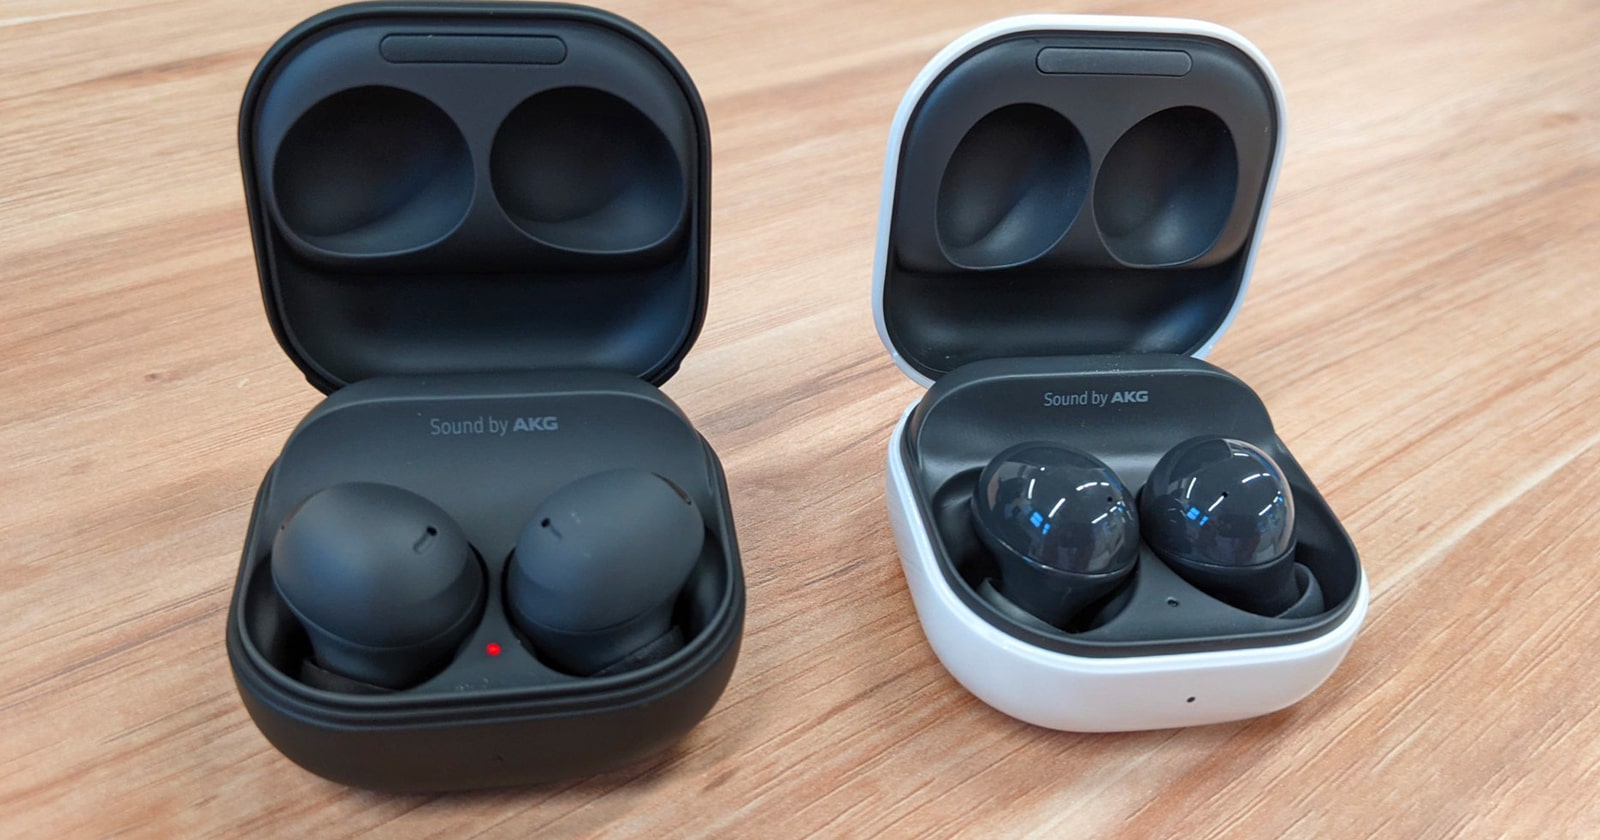 Difference Between Galaxy Buds and Galaxy Buds 2